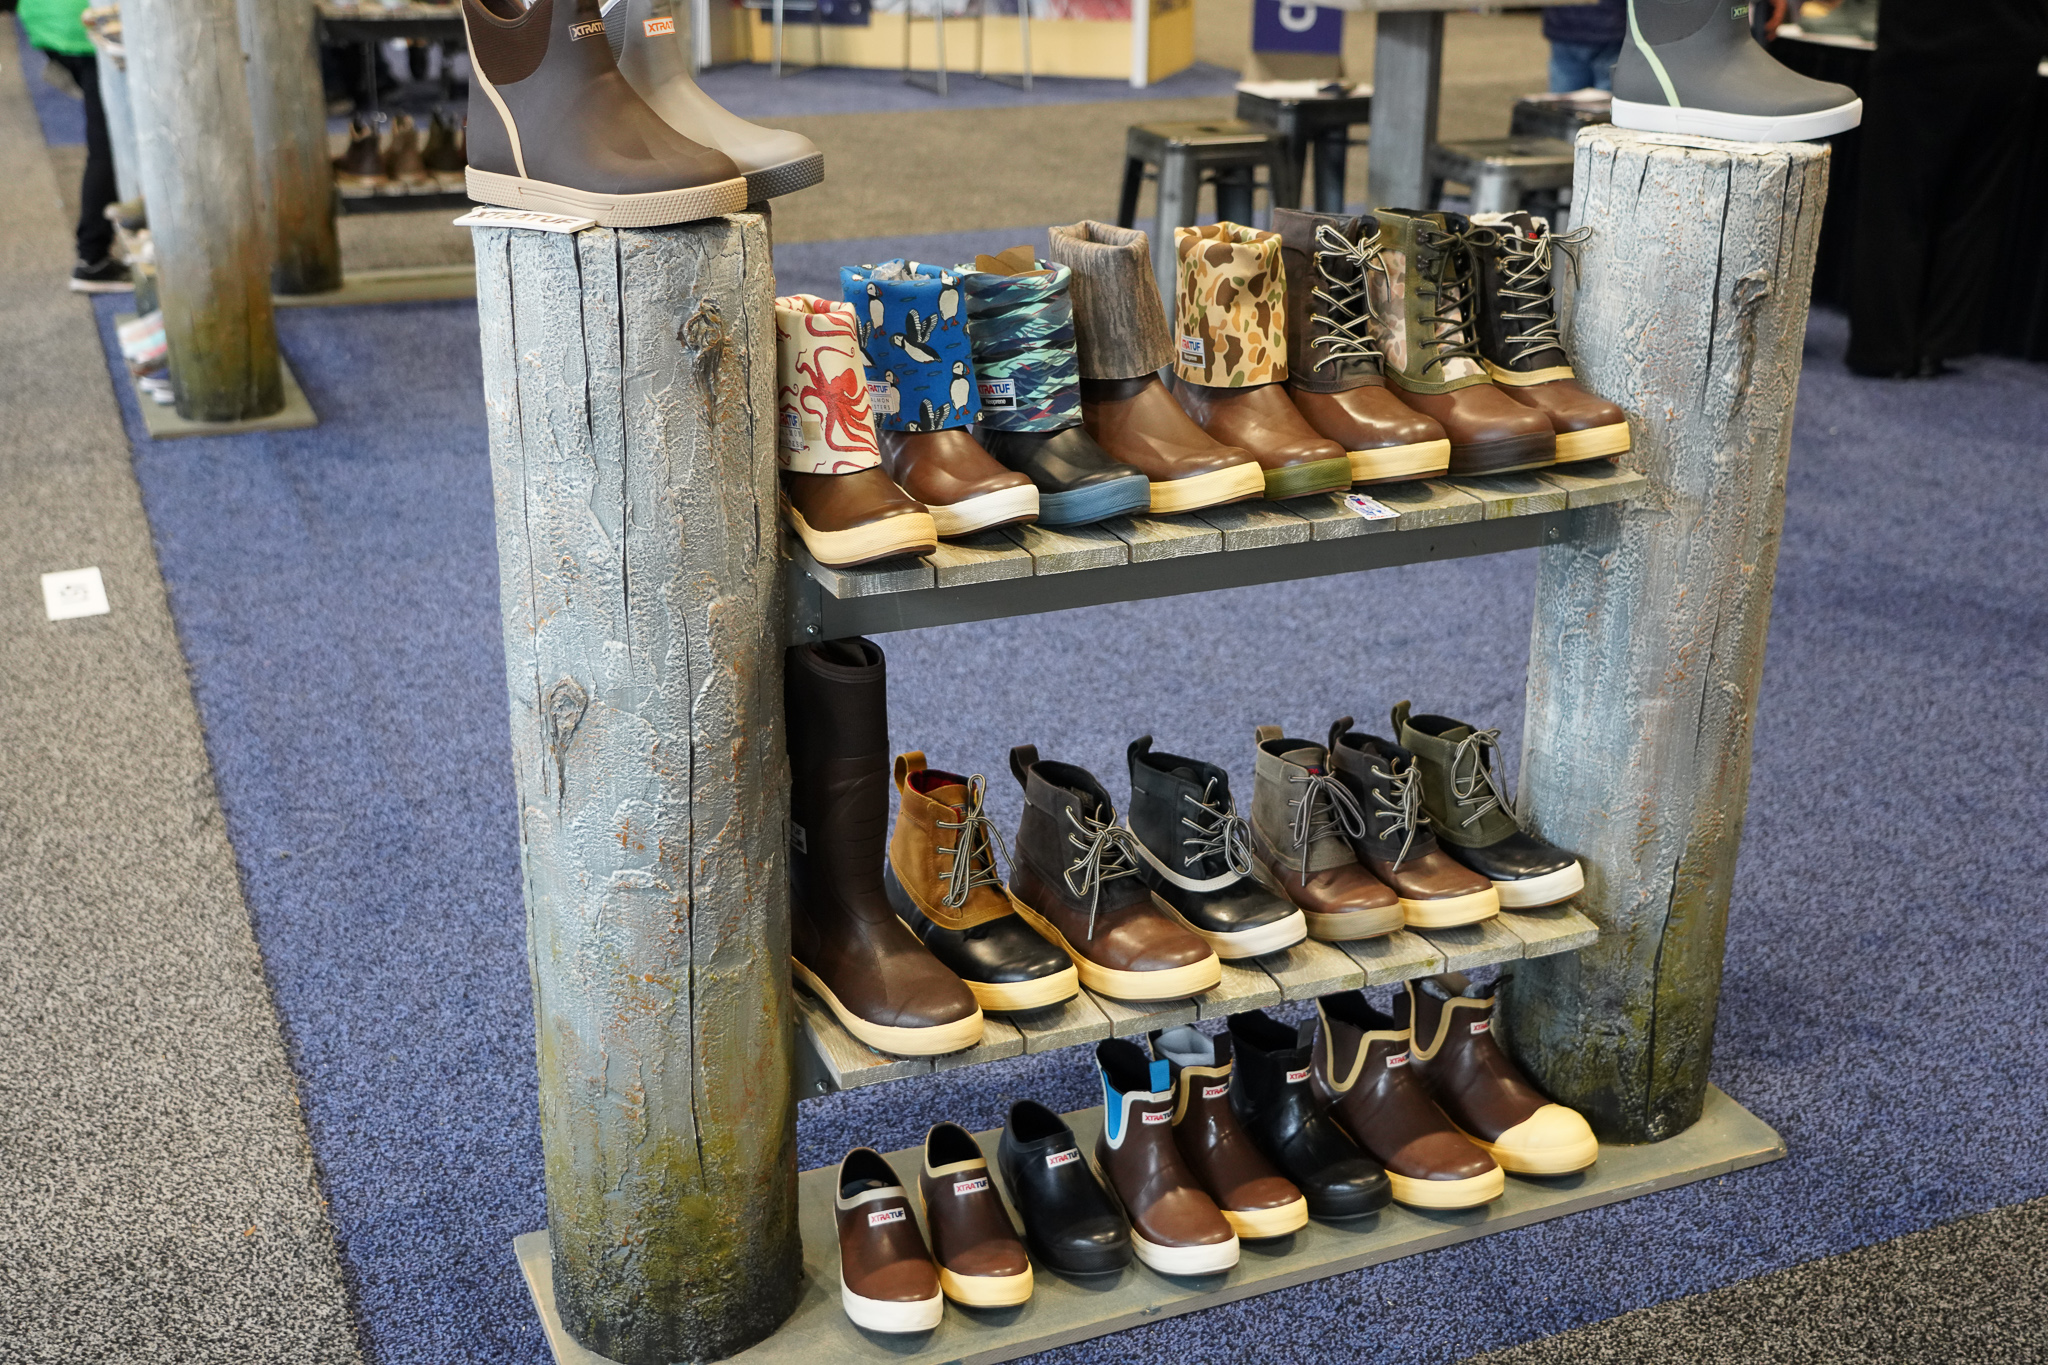 Six Commercial Fishing Deck Boots You Need to Know About in 2022